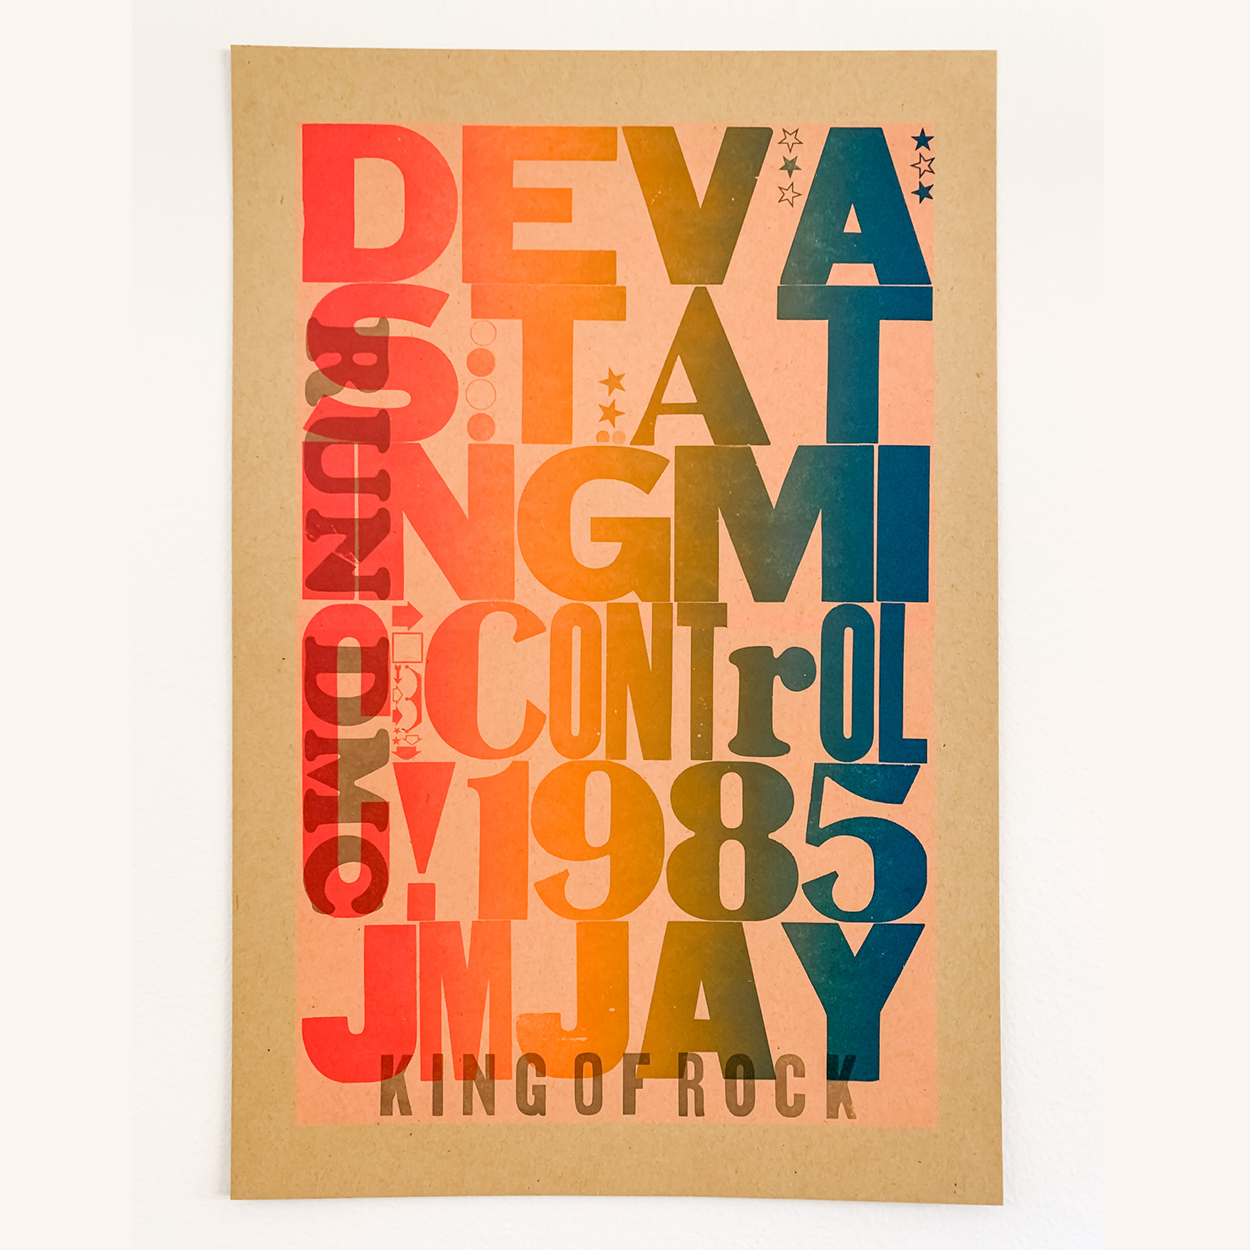 "FOR THE LOVE OF MUSIC": Six Letterpress Posters Celebrating Black Music Artists